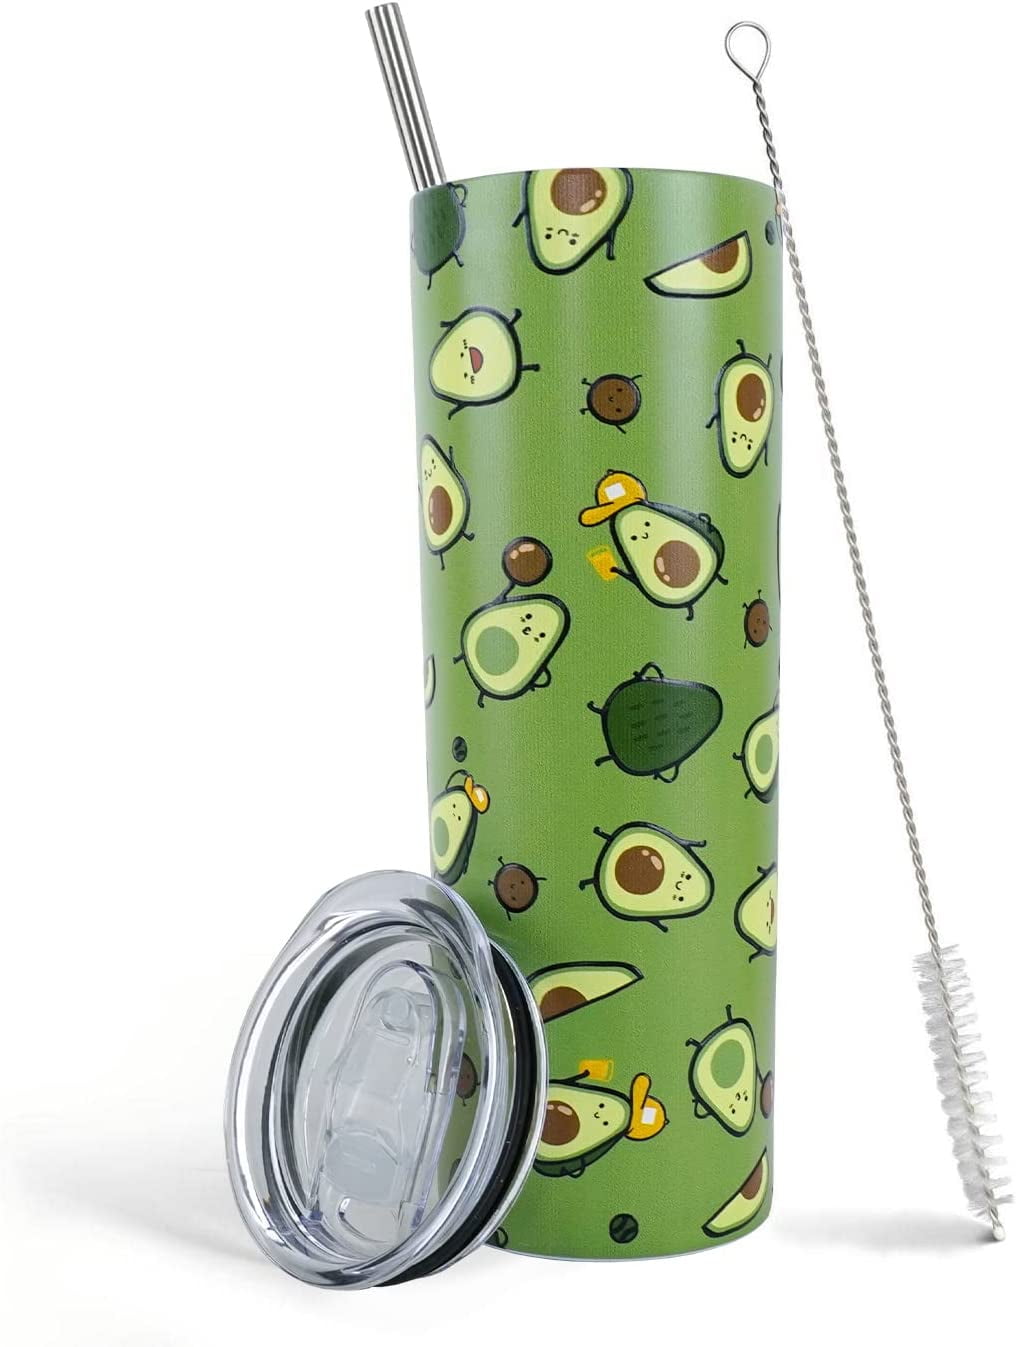 Avocado Tumbler with Lid and Straw, 20 Oz Stainless Cup Steel Insulated  Water Bottle Travel Coffee Mug, Gifts for Avocado Lover